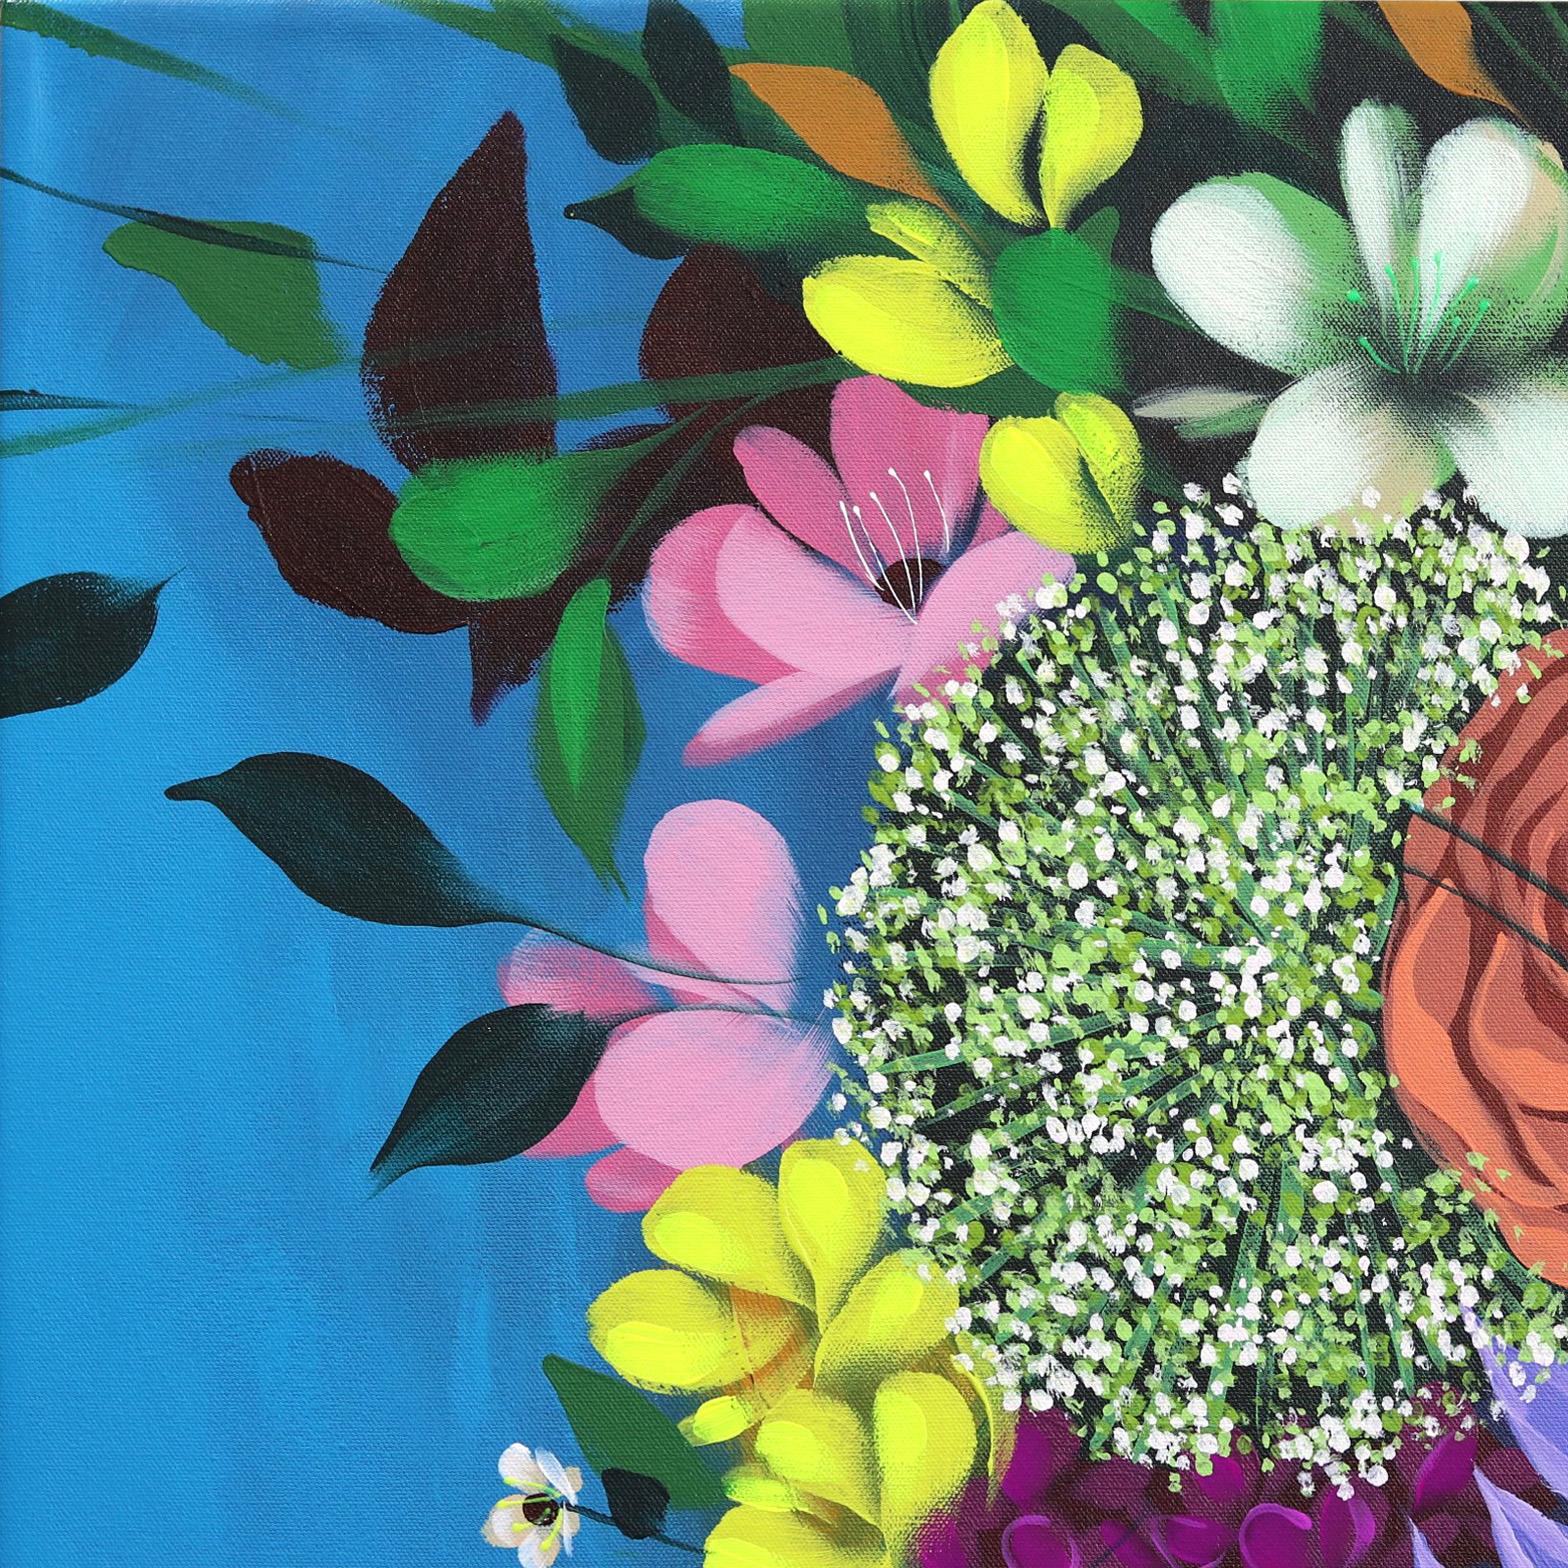 As your gaze lingers on one of Sally K’s paintings, you notice how Sally’s brush strokes add playfulness and life to the canvas, incorporating unexpected images and shapes of flowers, or abstract color combinations to convey the vibrant beauty of a